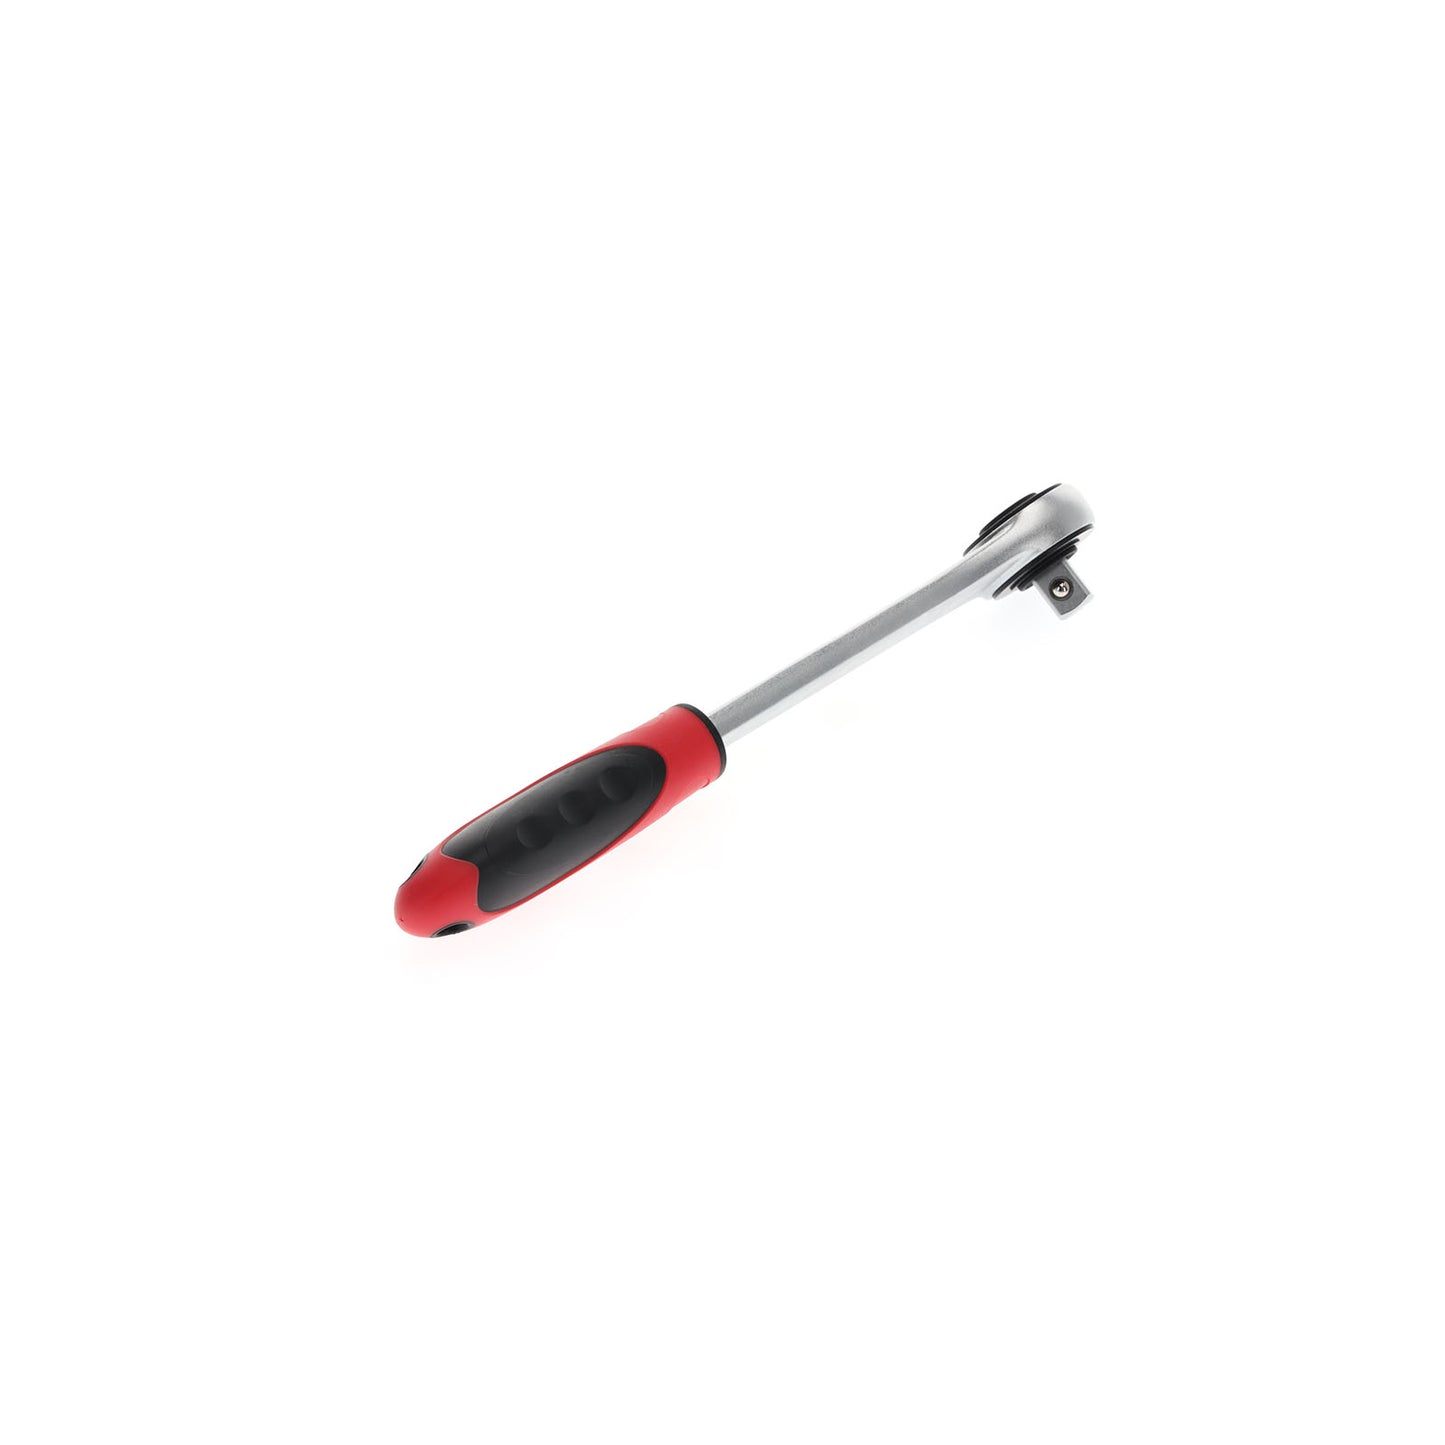 GEDORE red R60600006 - 1/2" through square drive ratchet (3300412)